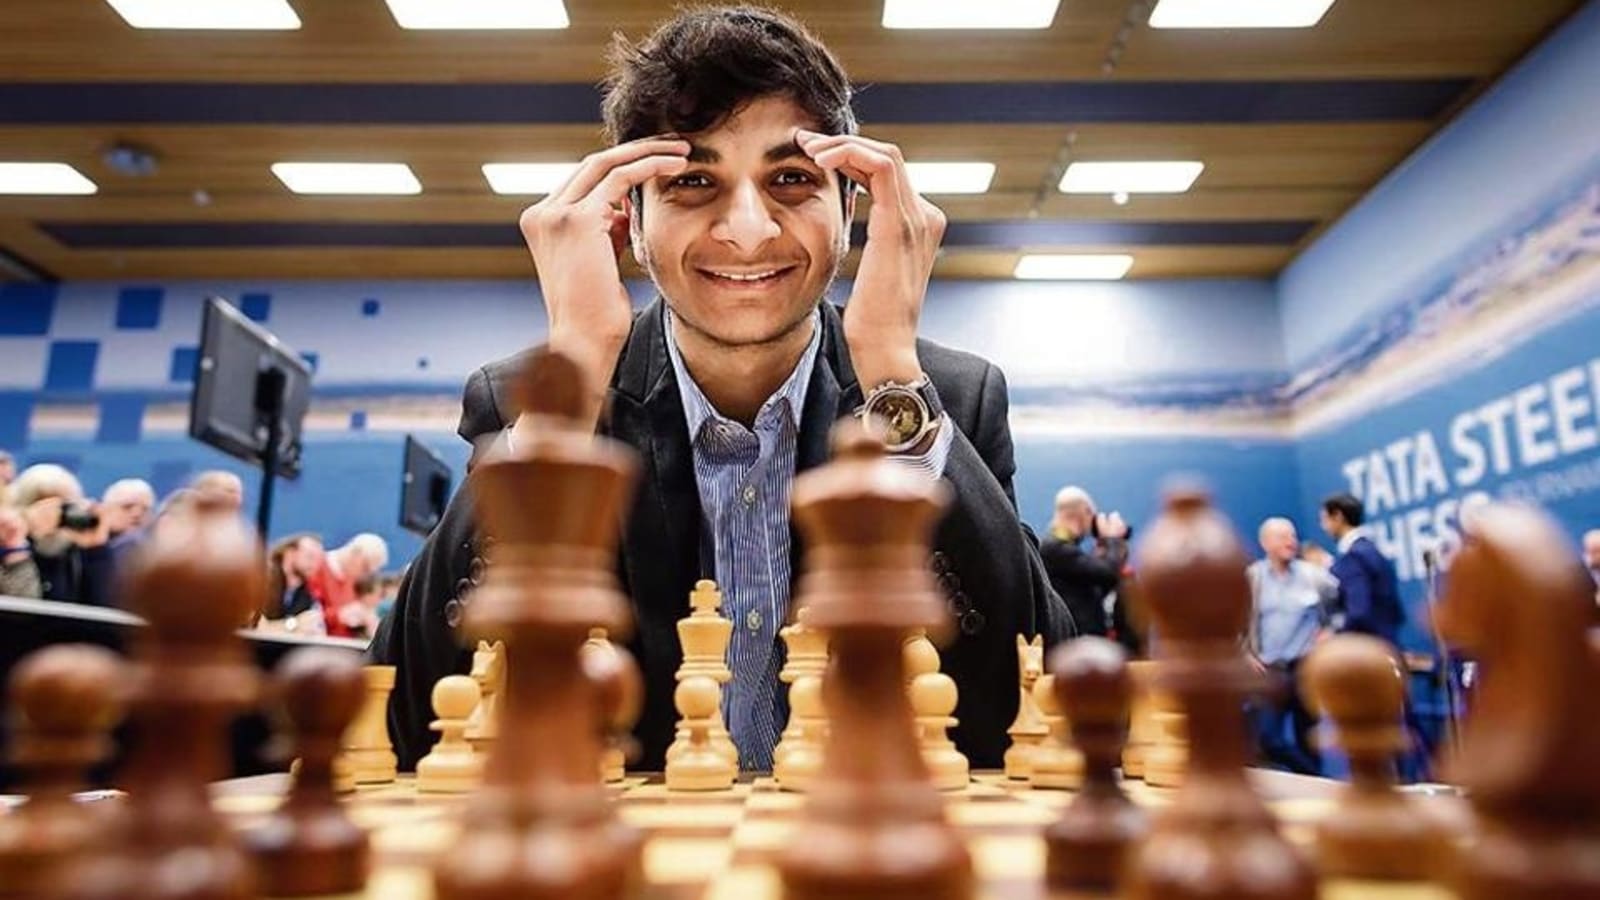 2021 World Cup  Chess by the Numbers